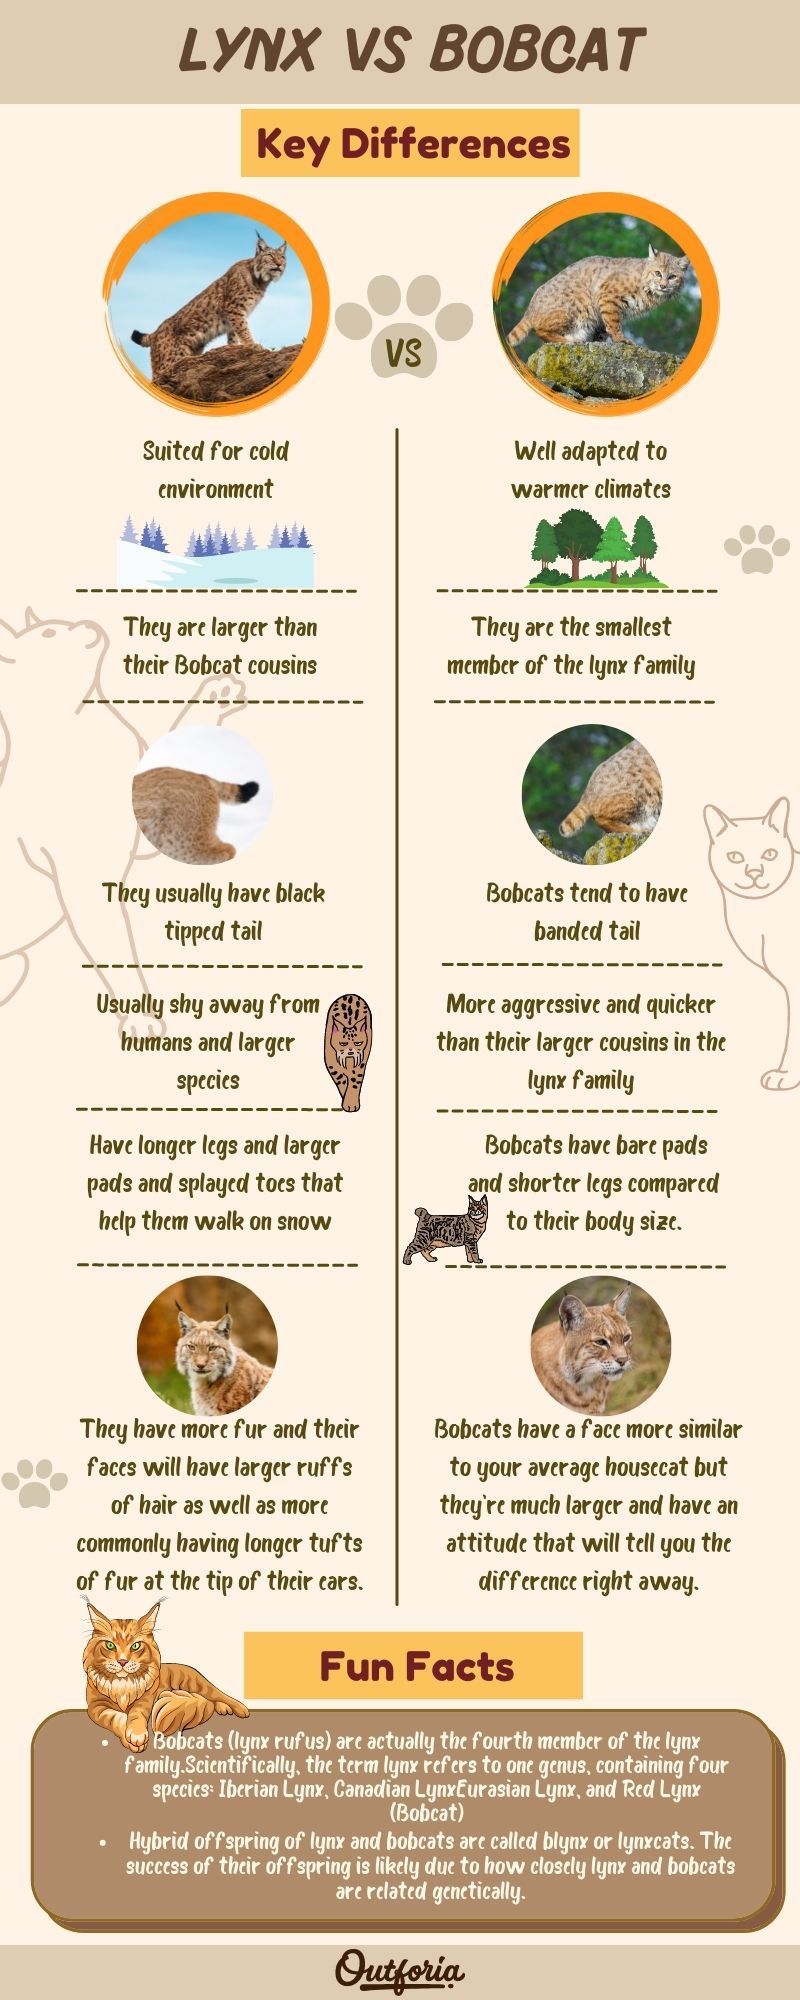 Lynx vs Bobcat chart on their key differences and fun facts about them